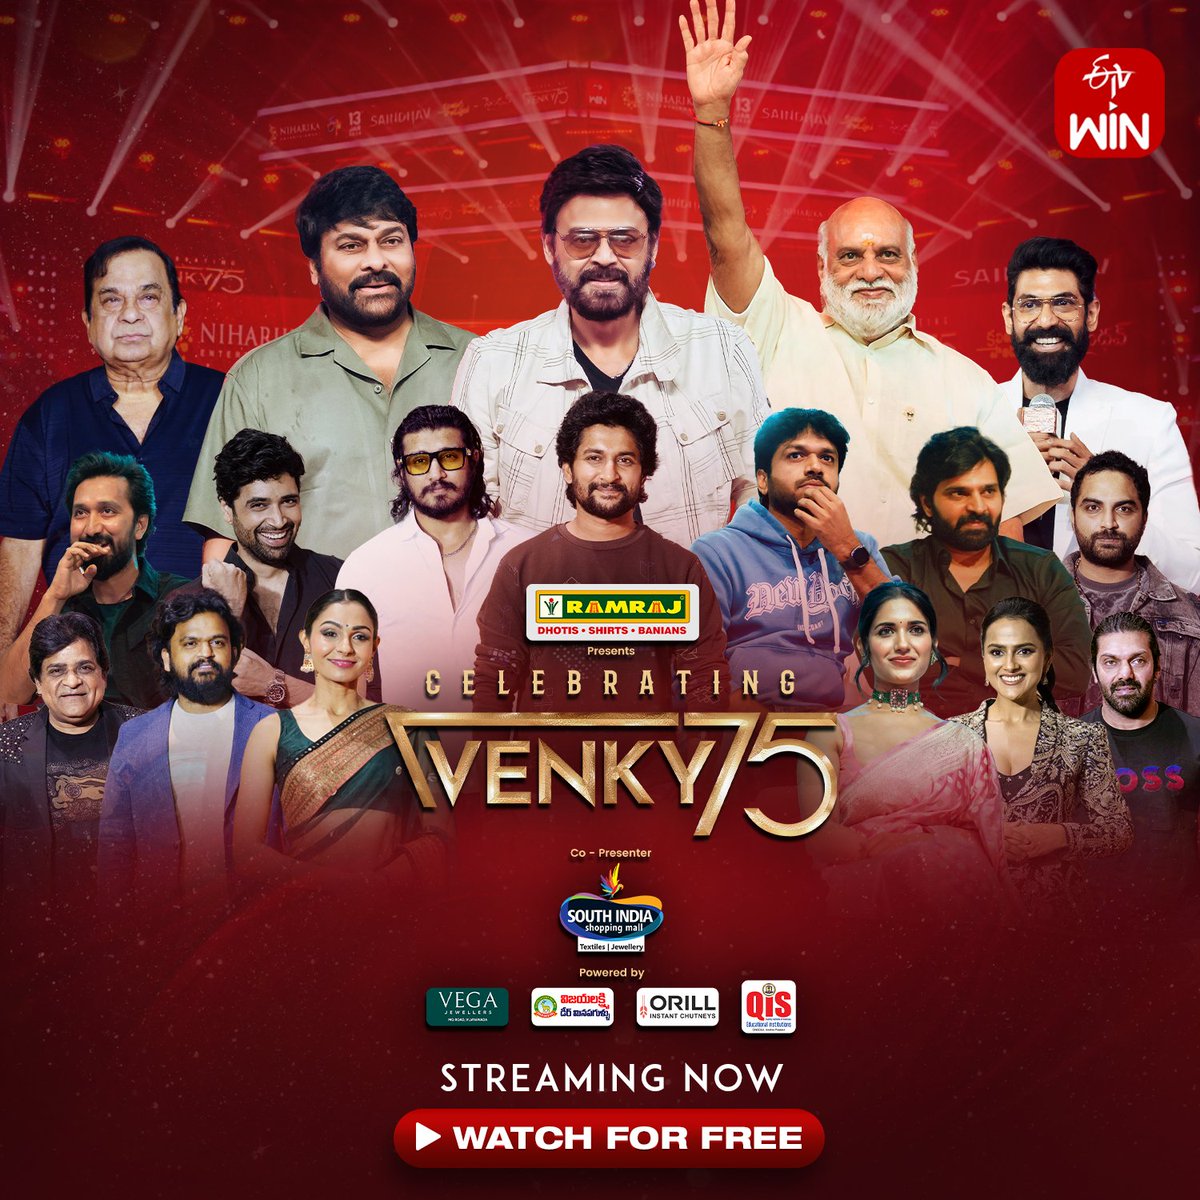 Let's bid adieu to 2023 in style with our beloved stars coming together to celebrate Victory @Venkymama🔥 #CelebratingVenky75 out on @etvwin💥 Watch it 'For FREE' here! ▶️ bit.ly/Venky75 @NiharikaEnt @MediaYouwe #Venky75 #SAINDHAV #SaindhavOnJan13th #WinThoWinodam